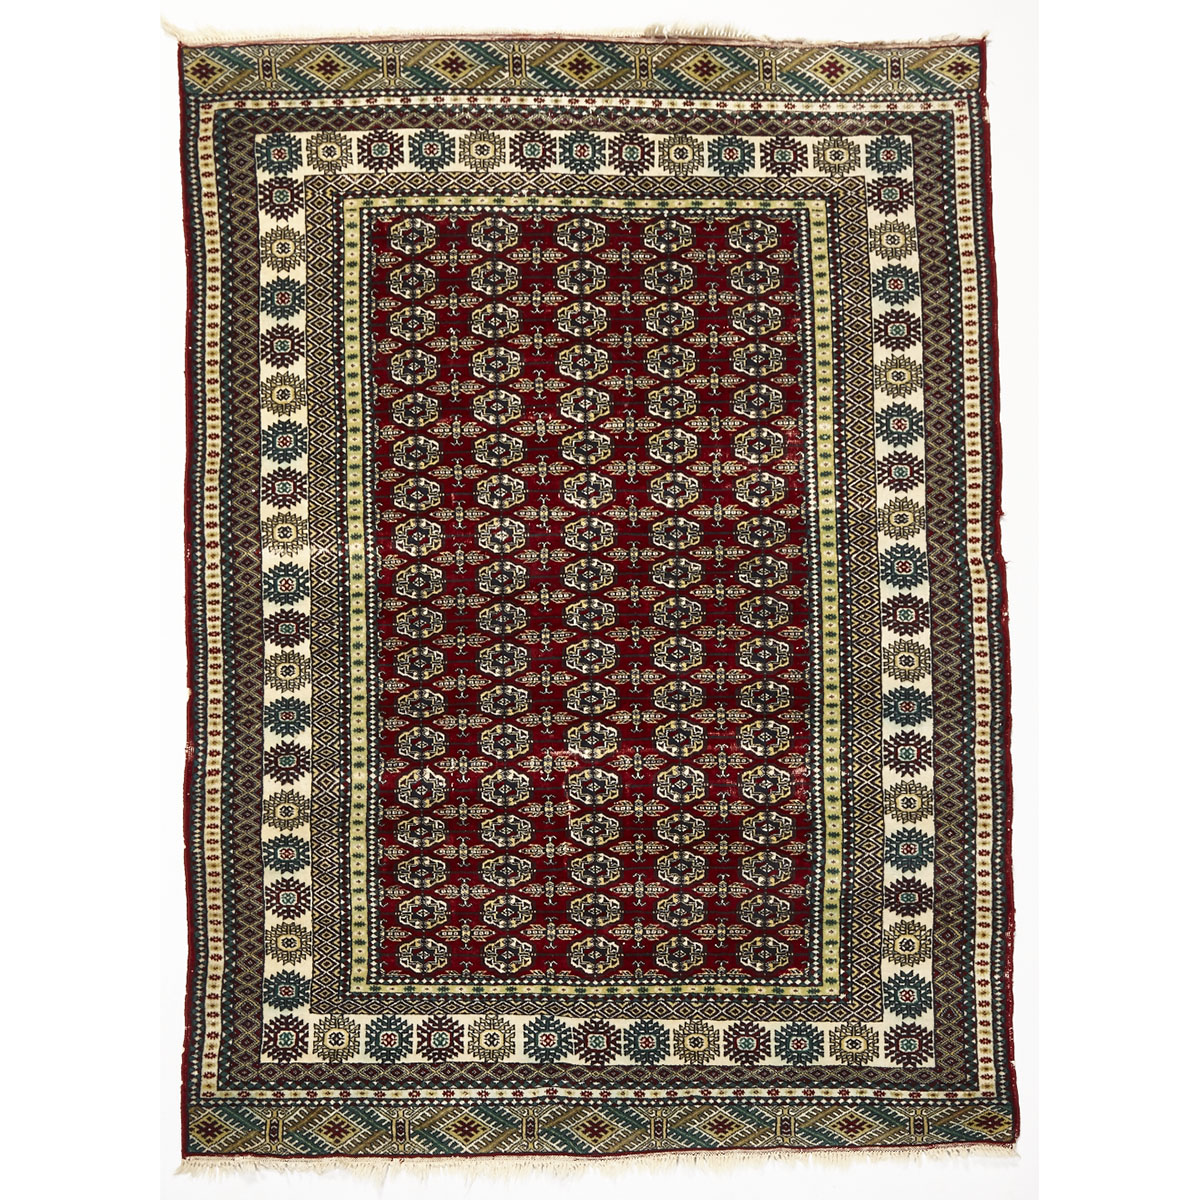 Indo Bokhara Rug together with a Afghan Prayer Rug, mid. 20th century